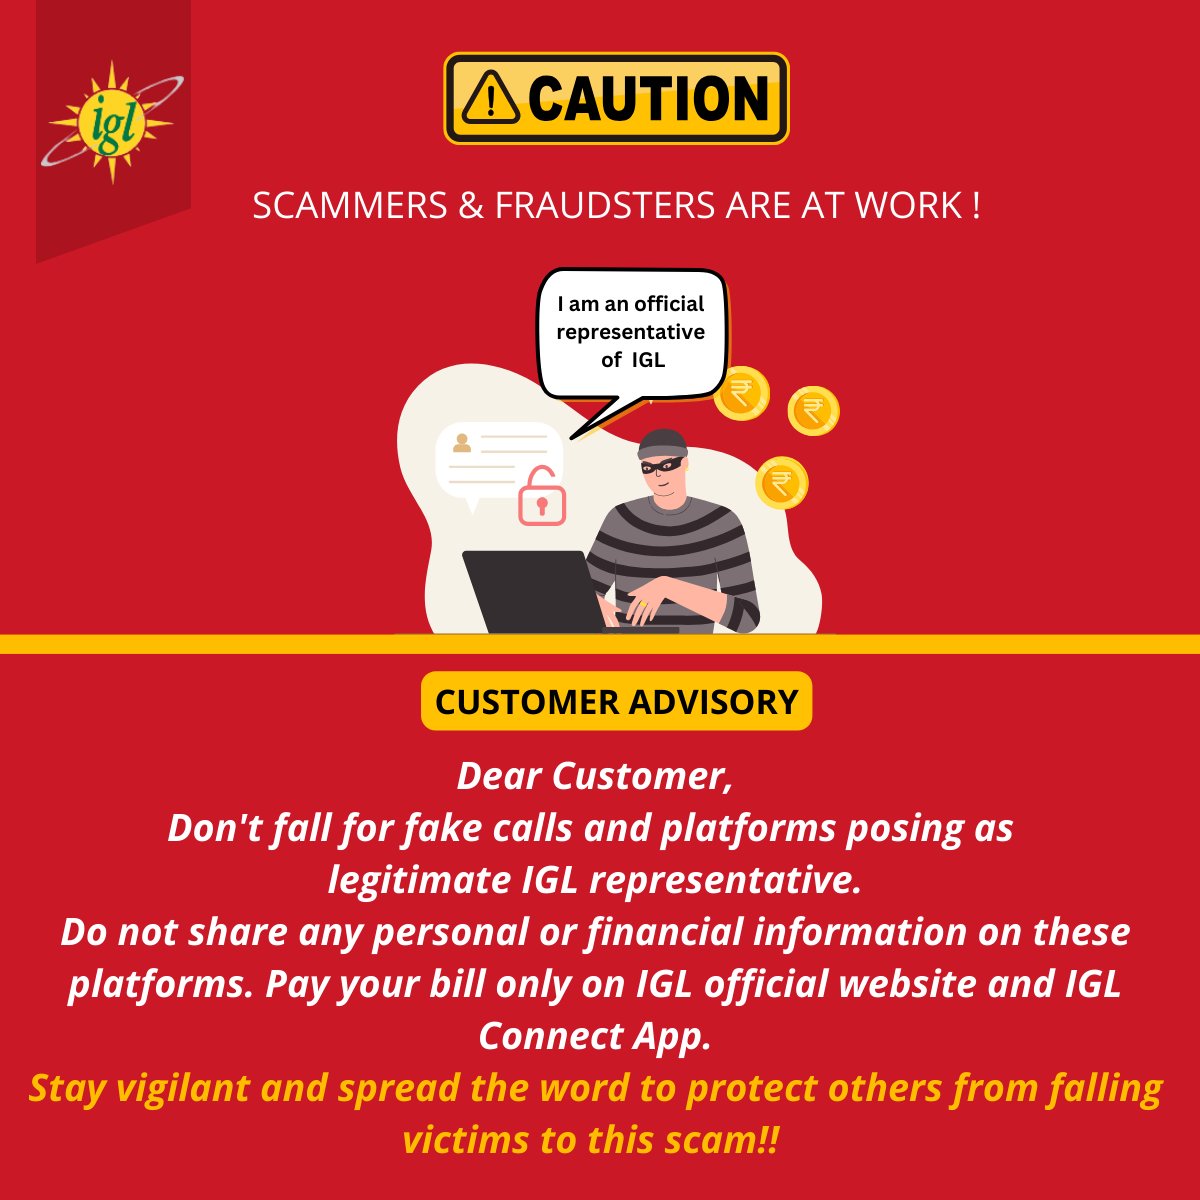 Dear Valued Customer,
Beware of fraudulent calls pretending to be IGL representatives. These imposters may try to steal your personal and financial information. 
#StaySafe #BewareOfScams #IGL #ProtectYourInfo #StayAlert #SafetyFirst #CustomerAlert #ScamAwareness #LegitOnly